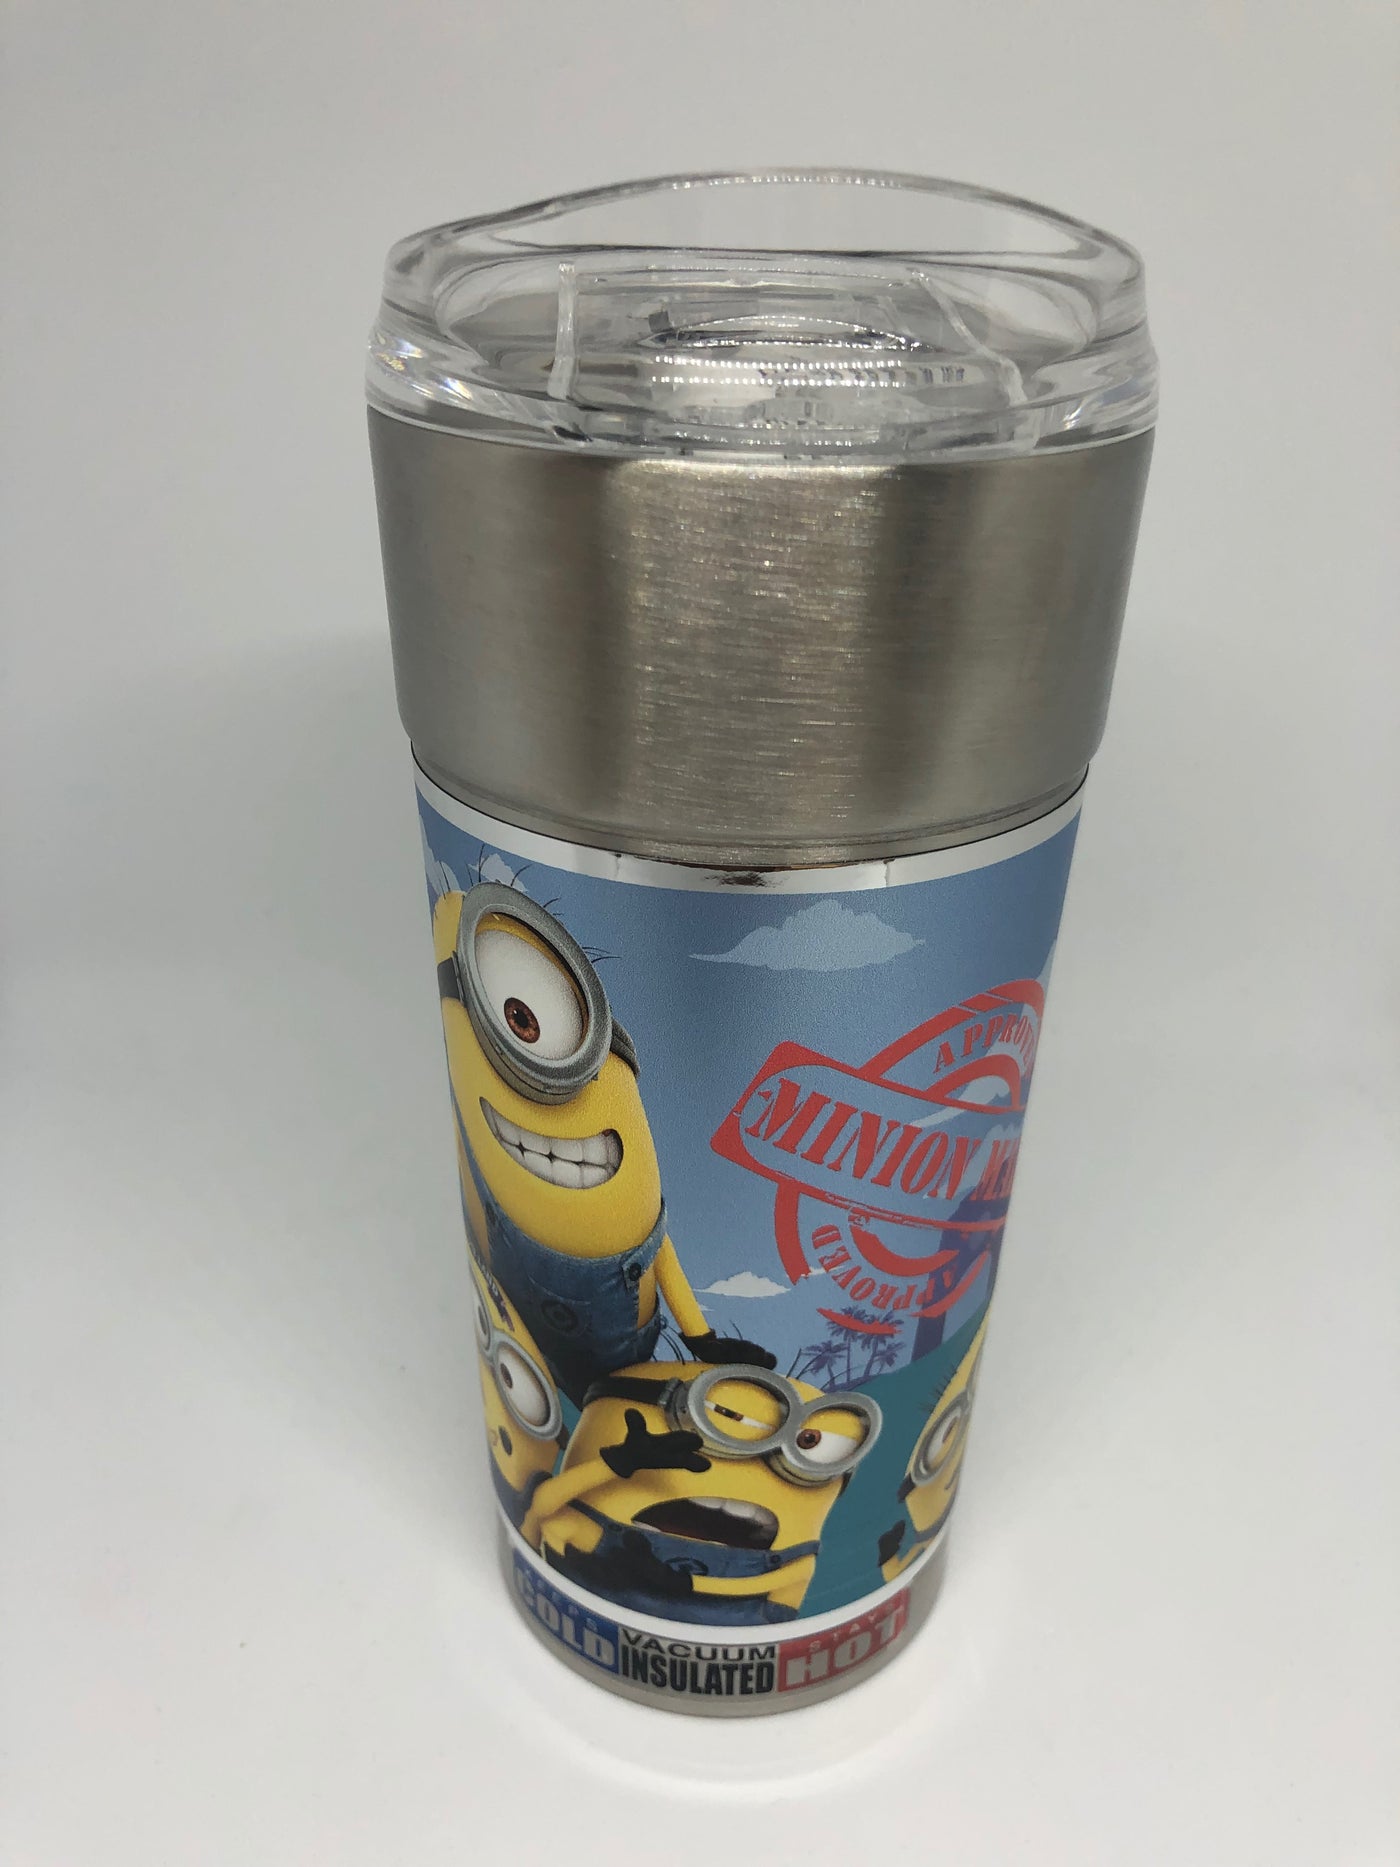 Universal Studios Orlando Despicable Me Approved Minion Mail Tumbler New